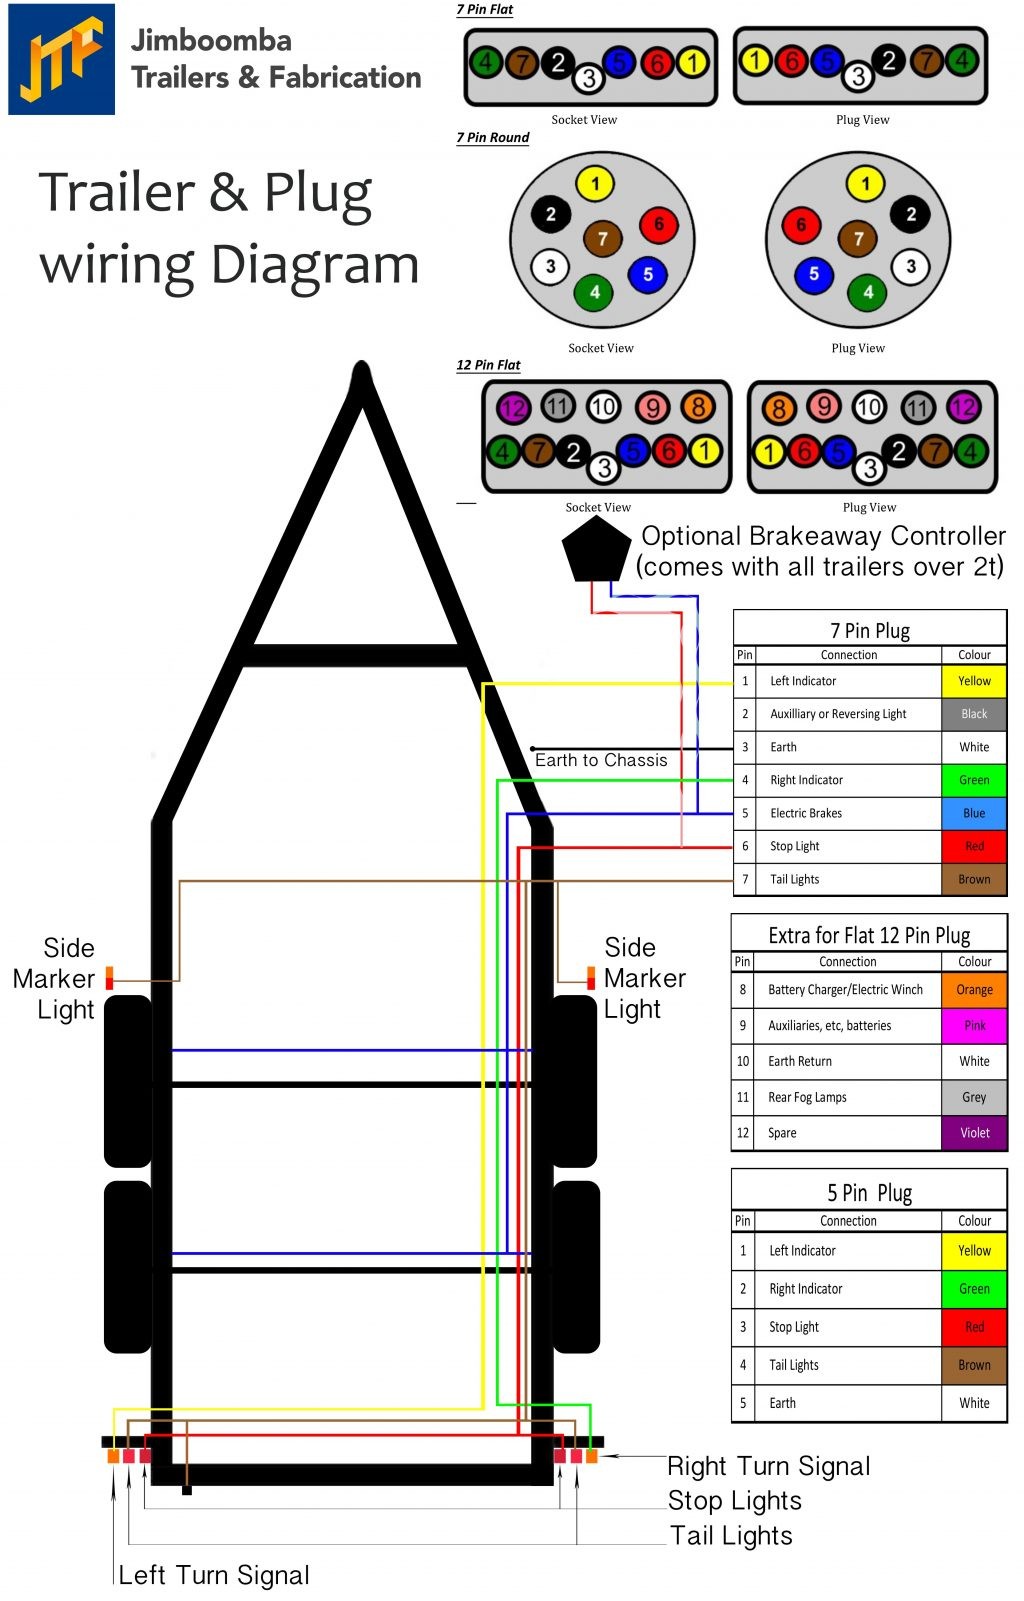 stunning tail lights wiring diagram pictures inspiration grote rh wommapedia wiring tail lights and turn signals wiring tail lights up from scratch